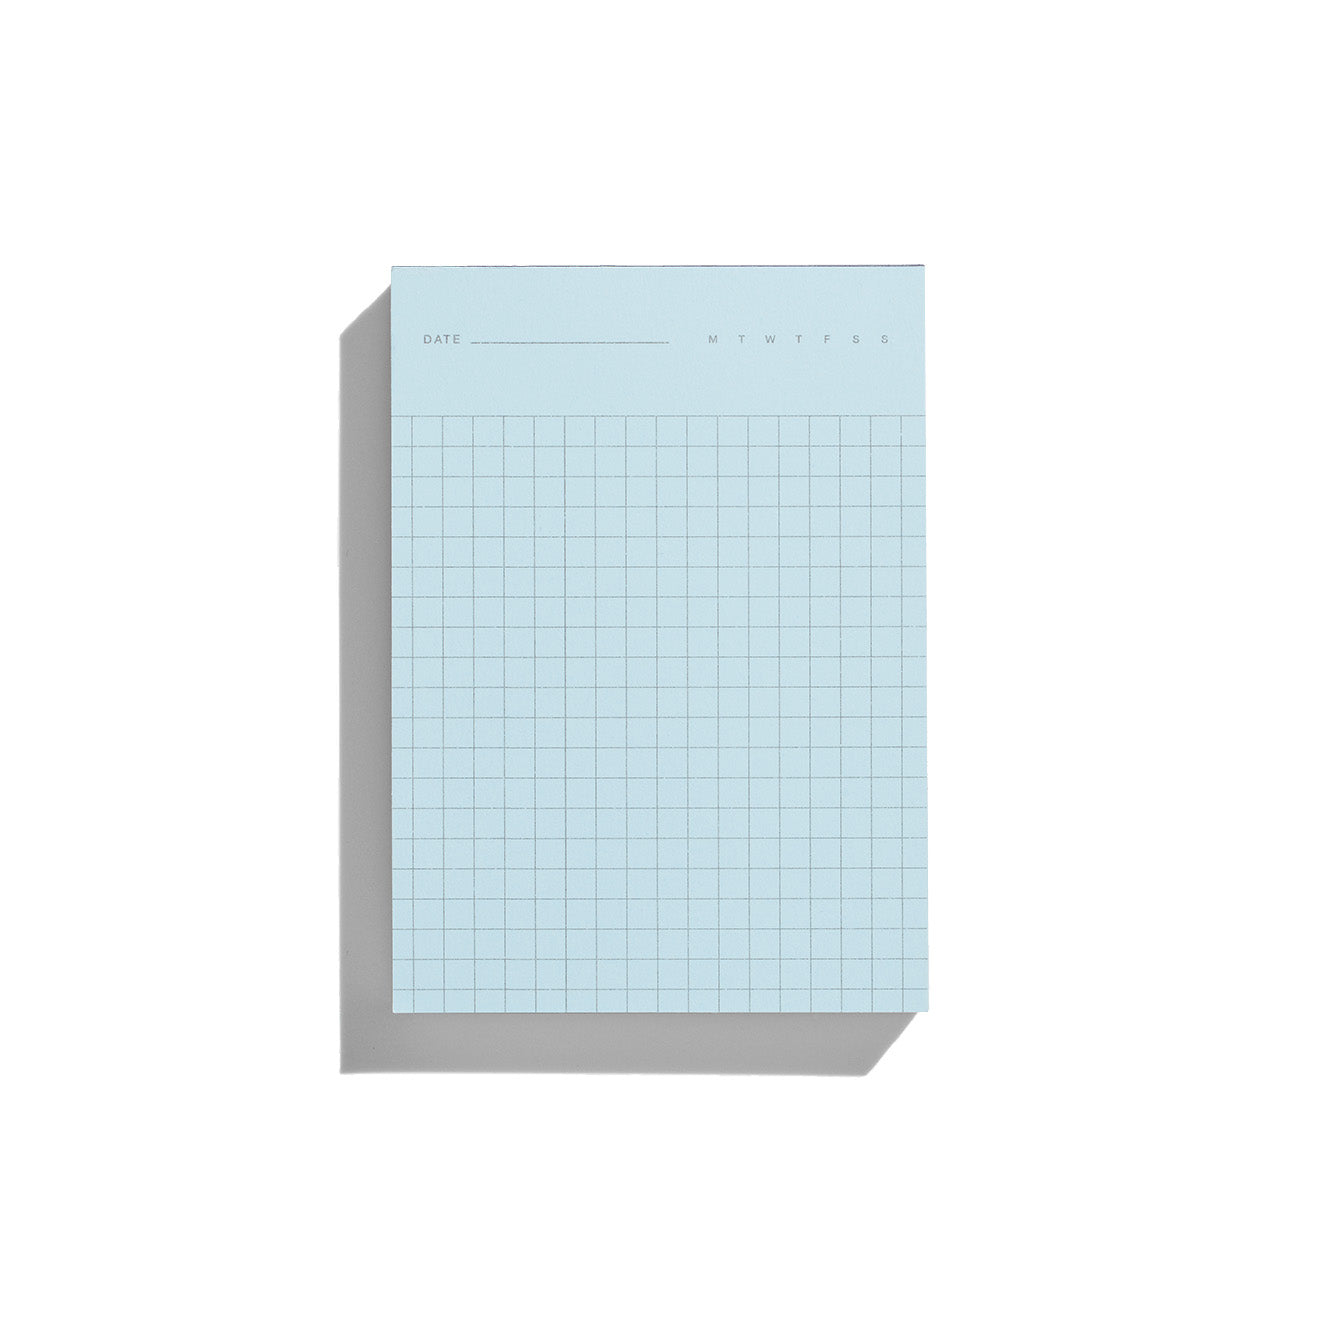 Grid sheet of 2-in-1 Notepad in Blue and Green by Before Breakfast. Grid and ruled sheets. Made in England and fountain pen friendly.